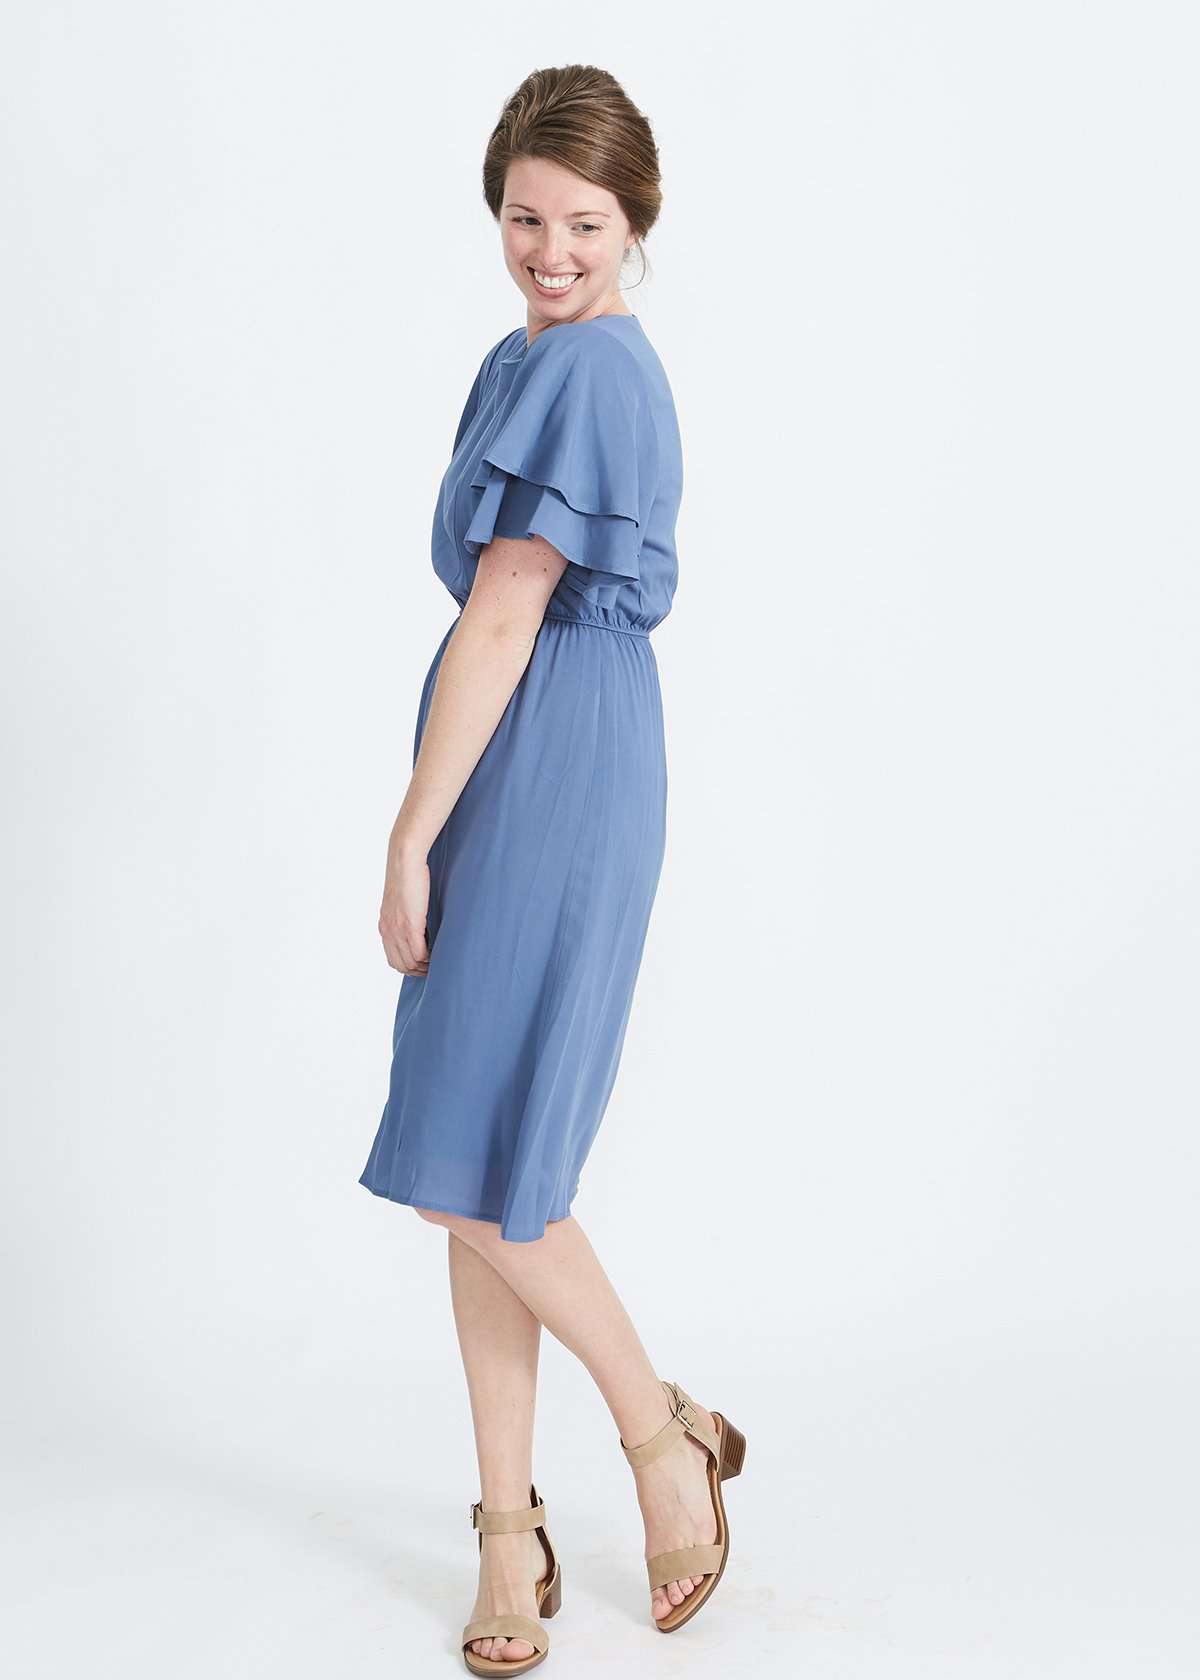 woman wearing a dusty blue empire waist dress with double ruffle sleeves that is lined and falls below the knee